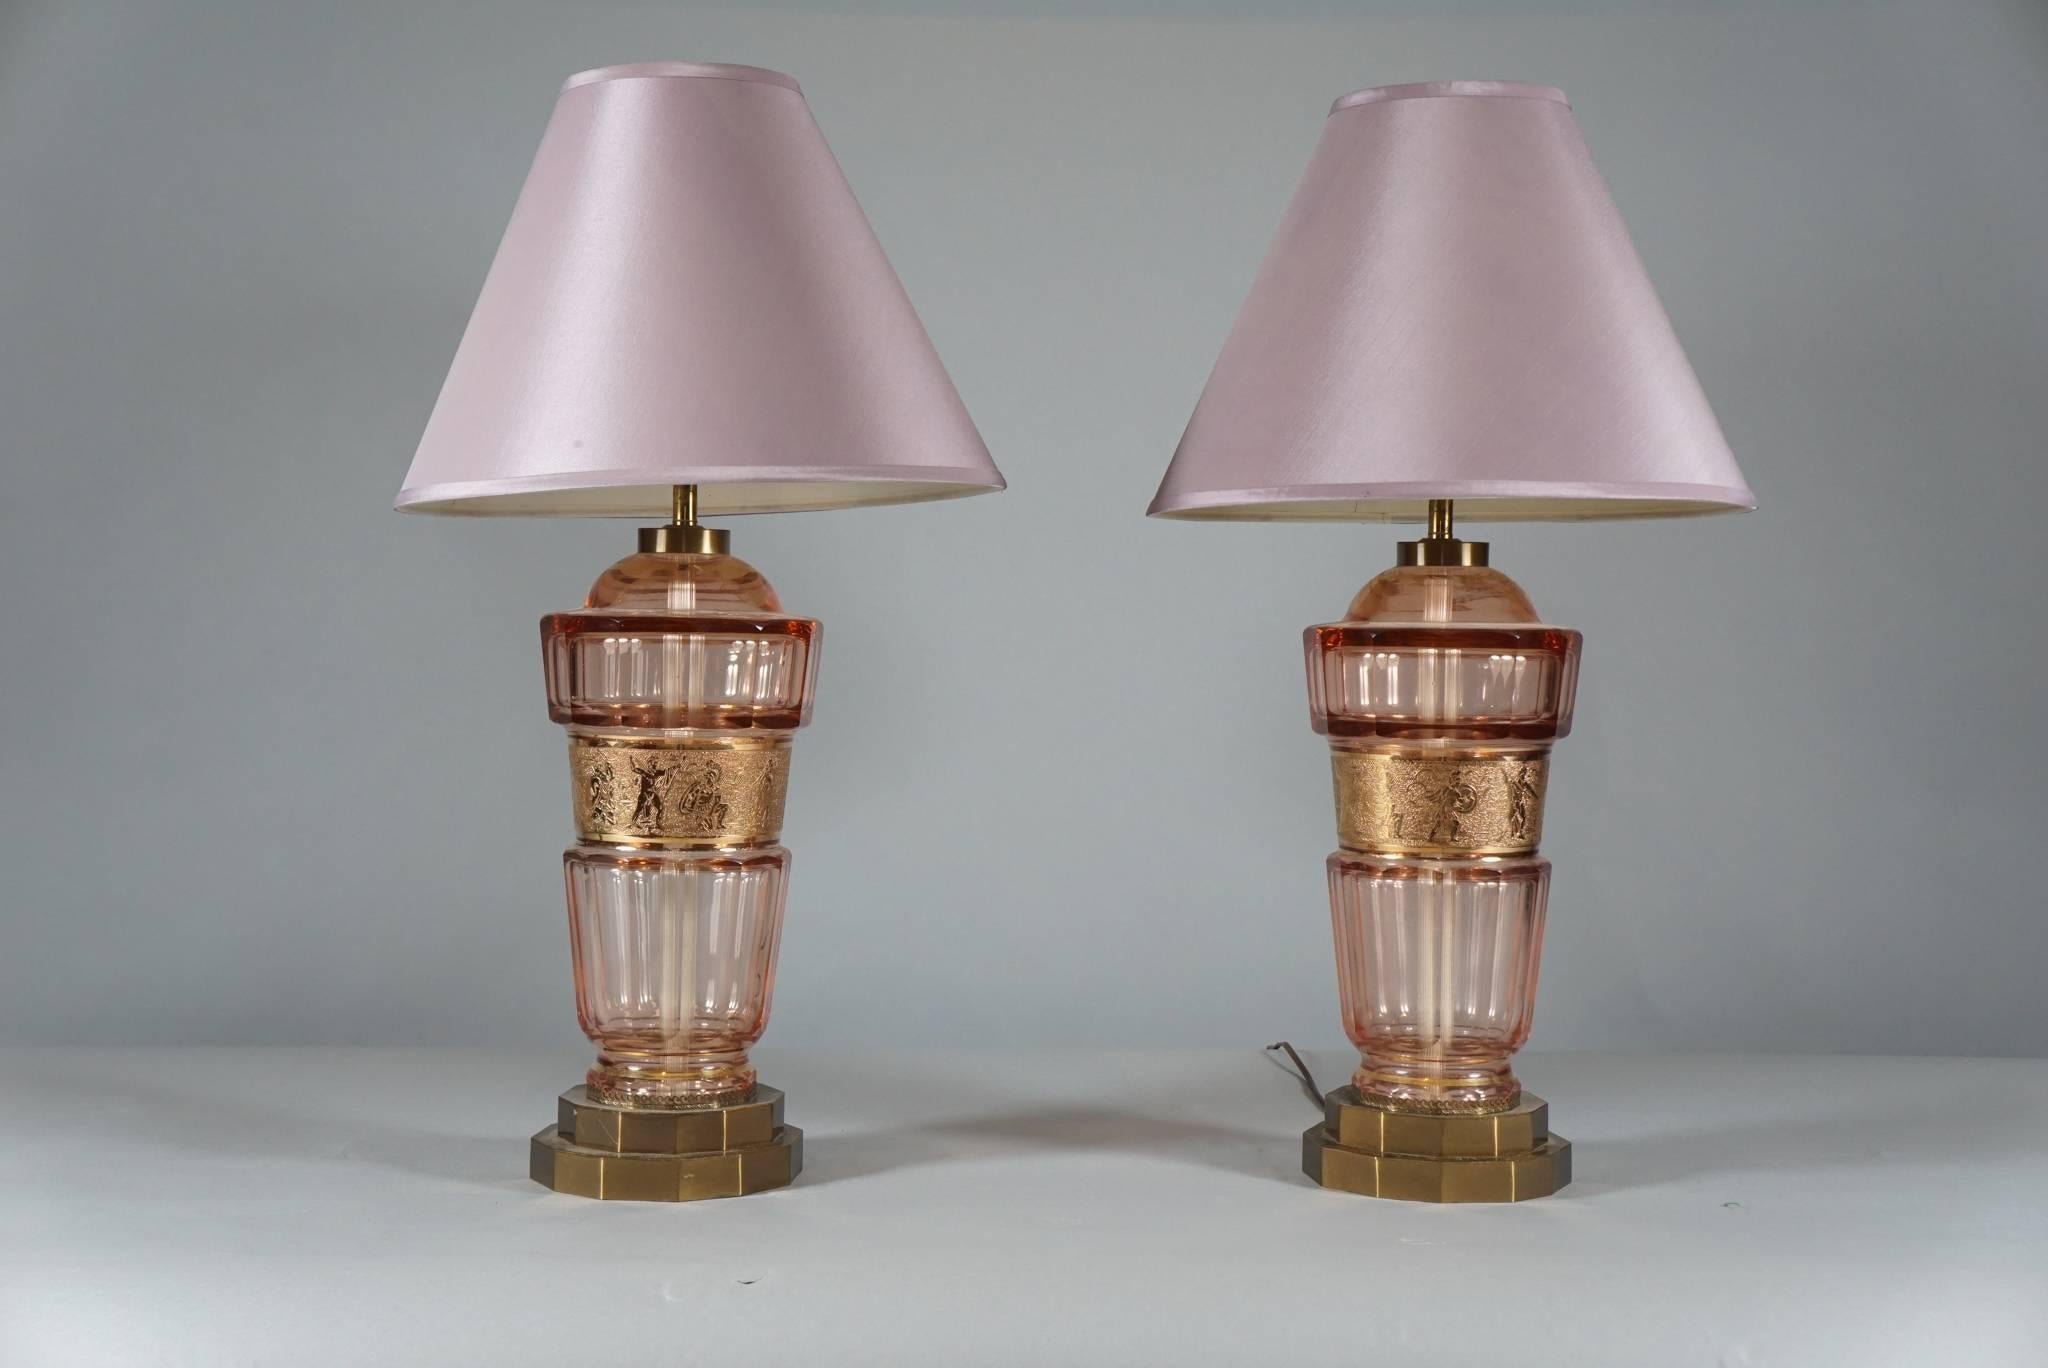 A pair of fine quality Art Deco decagonal glass lamps, the glass in light pink tones, the glass with a centrally placed gilded frieze with images of classical warriors. The lamps mounted on brass bases. The lamps by Czechoslovakian luxury glass